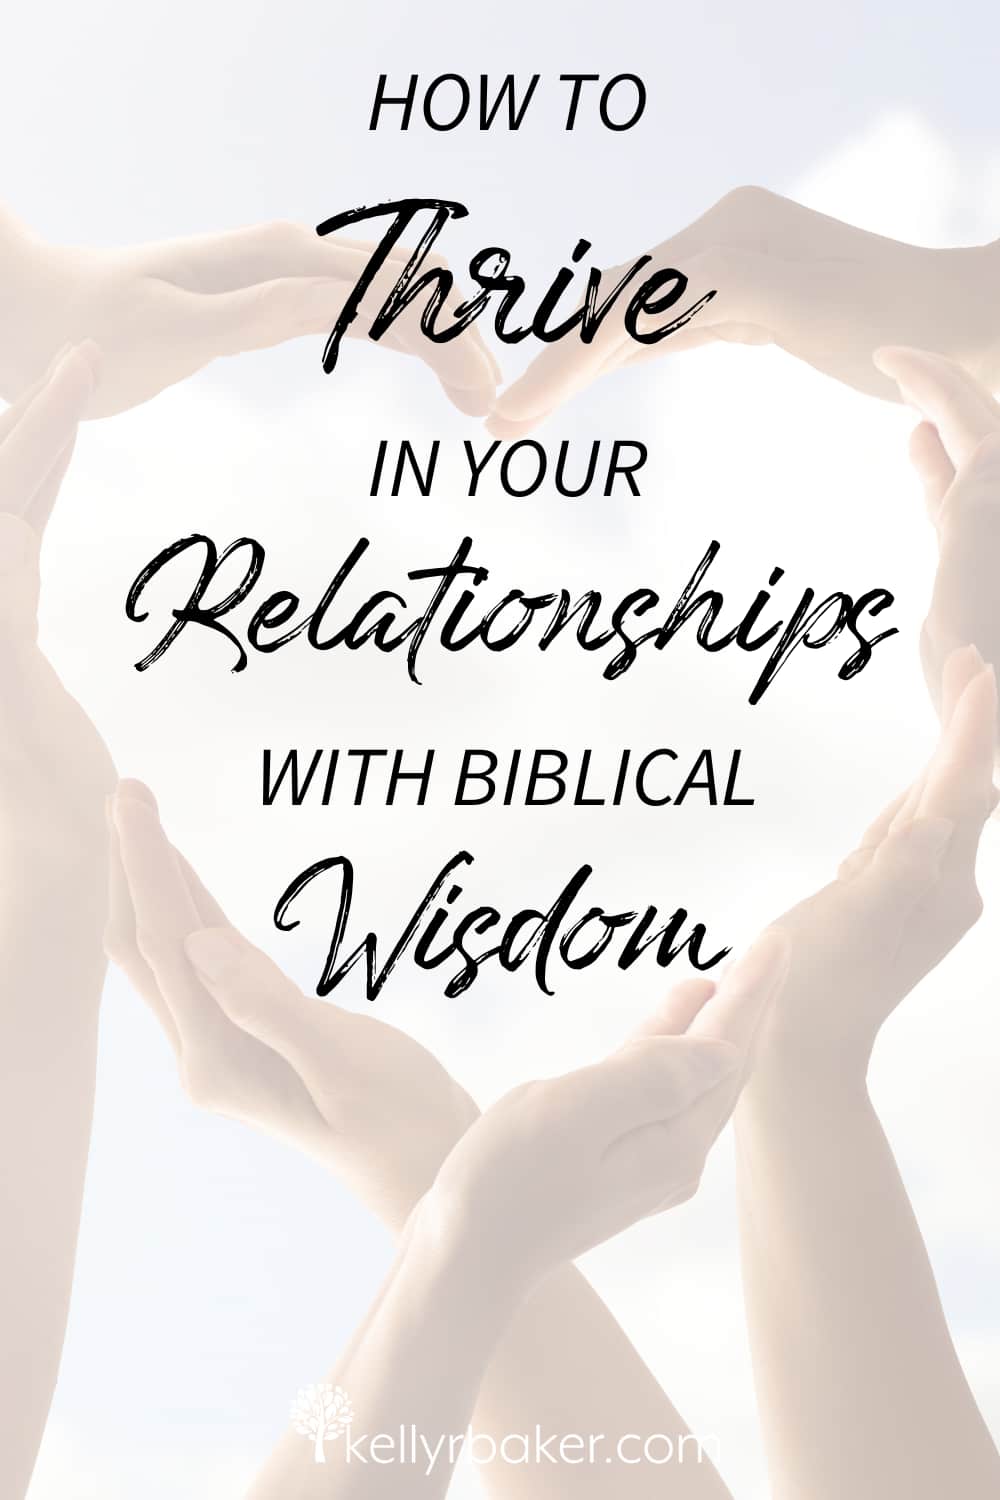 How to thrive in your relationships with biblical wisdom.